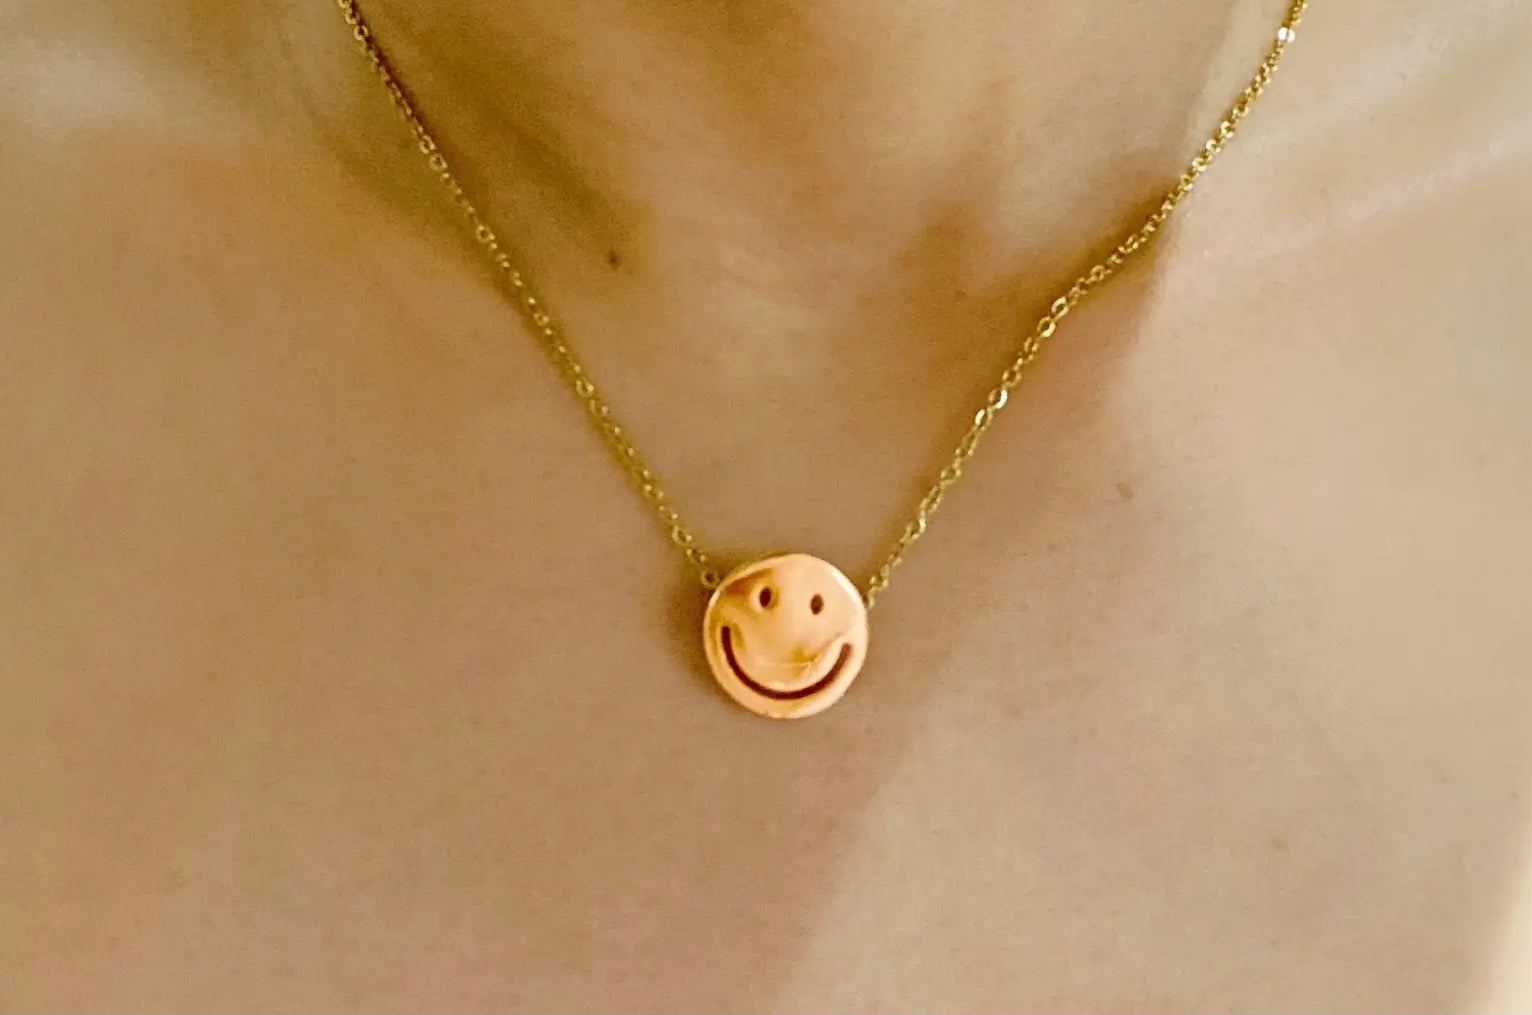 Put On A Happy Face Necklace